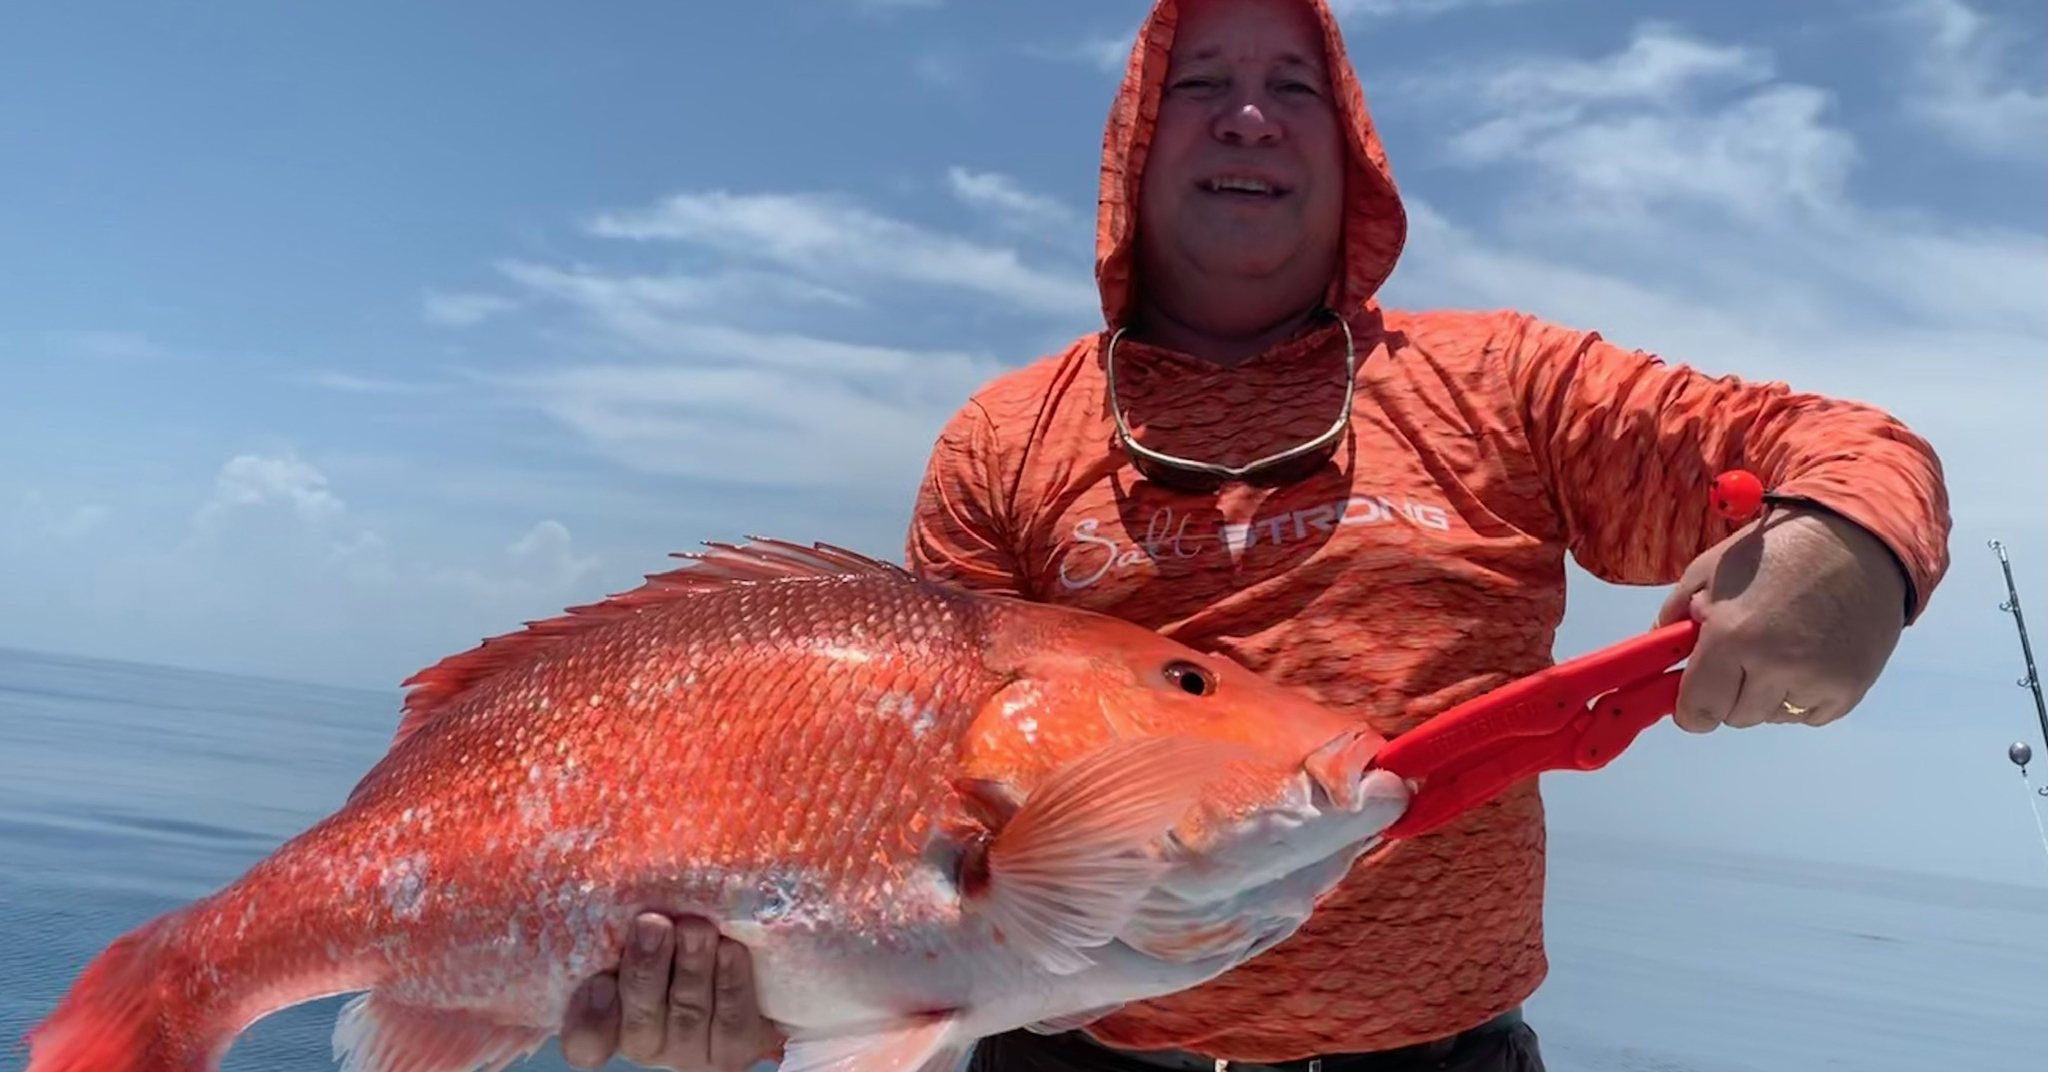 http://american%20red%20snapper%20fishing